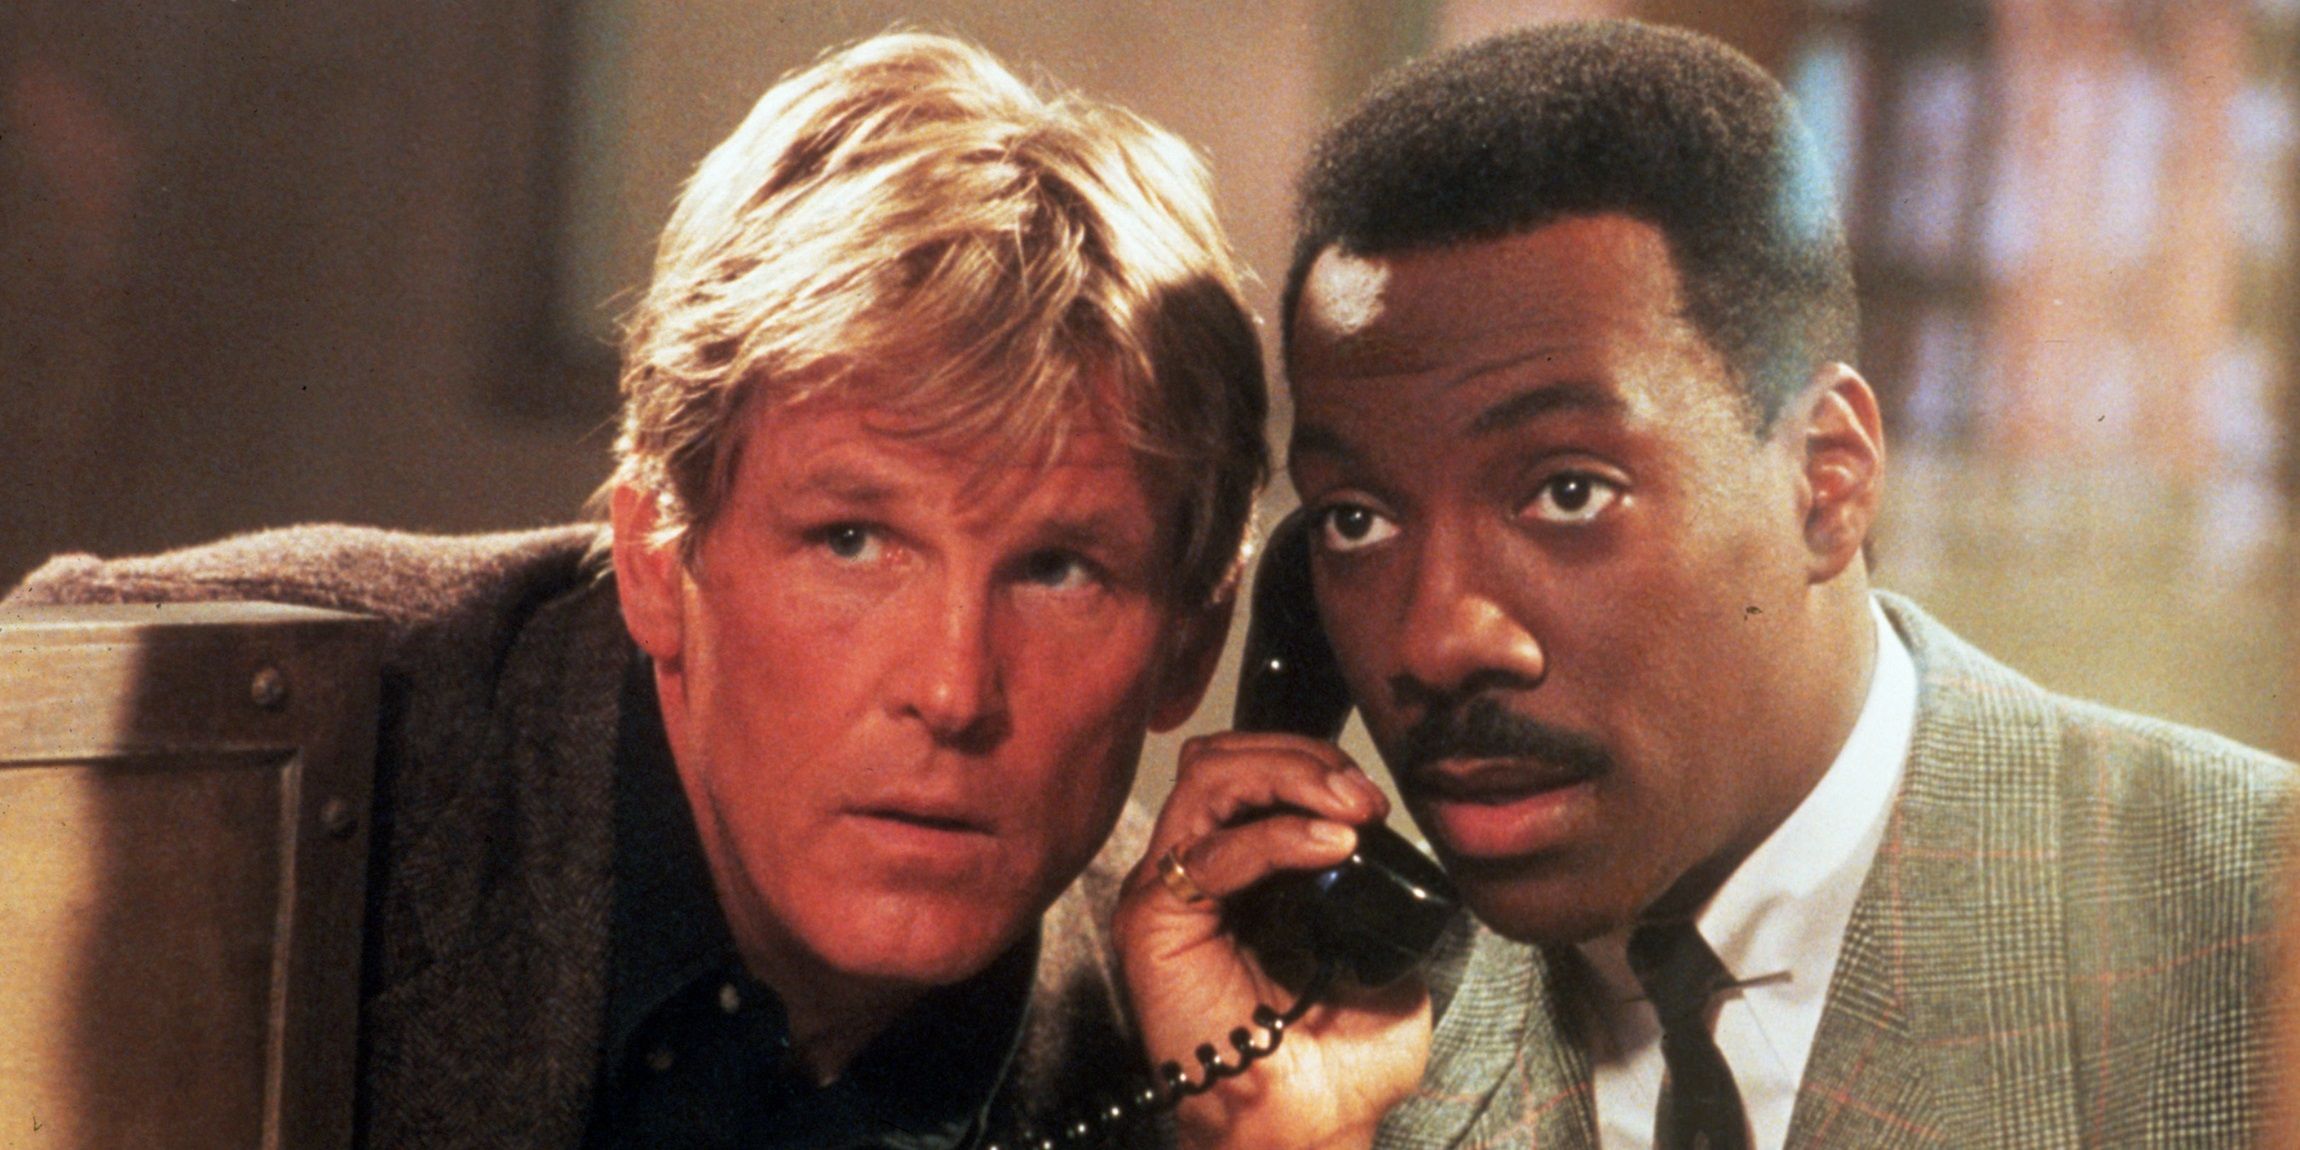 Eddie Murphy and Nick Nolte in 48 Hrs